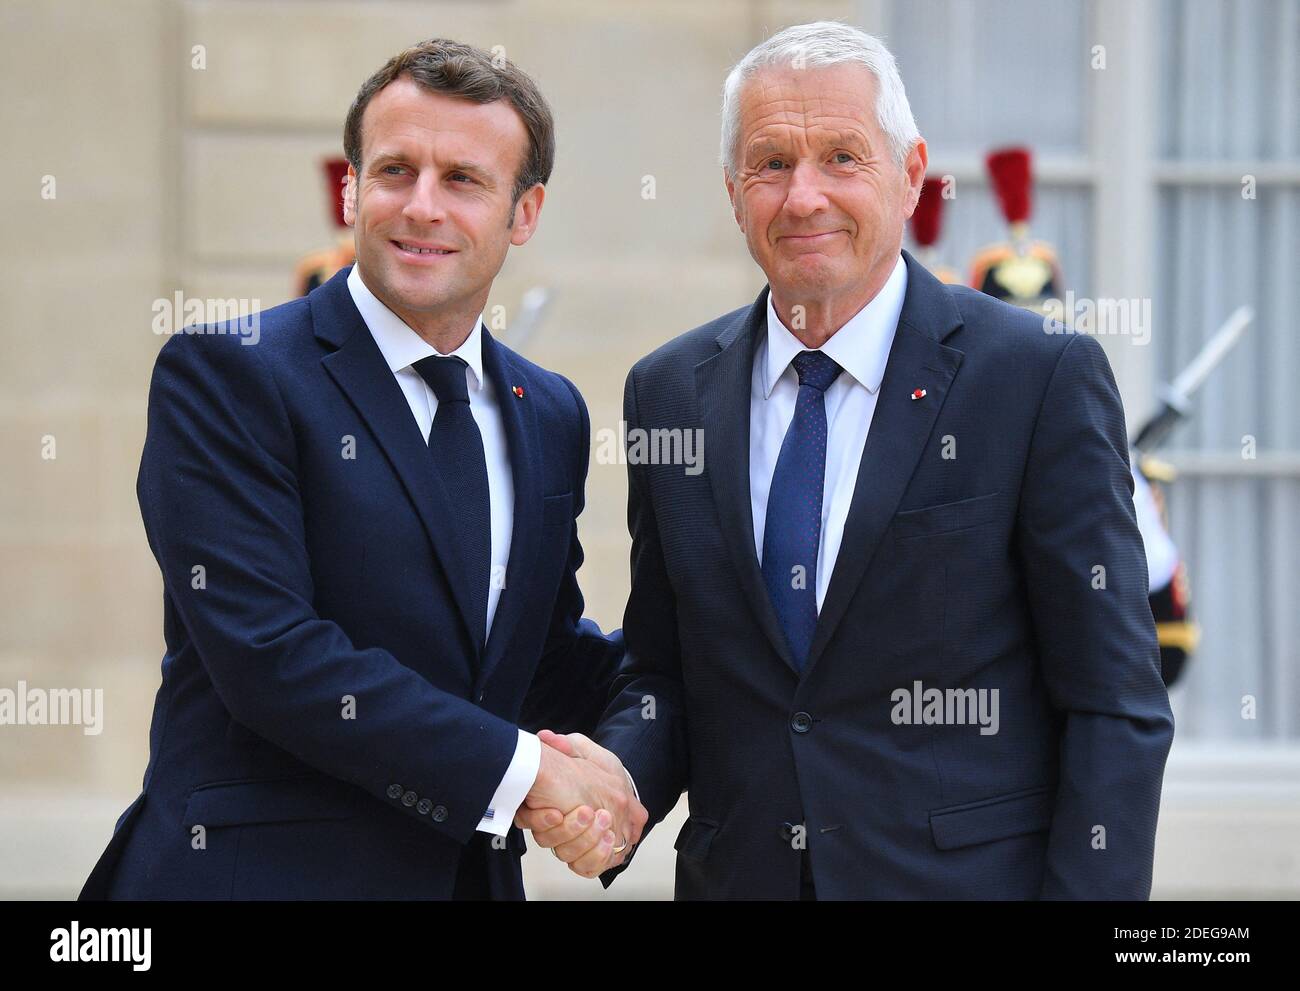 French President Emmanuel Macron welcomes the Secretary General of the Council of Europe Thorbjorn Jagland at the Elysee Palace in Paris, France on May 6, 2019. Photo by Christian Liewig/ABACAPRESS.COM Stock Photo